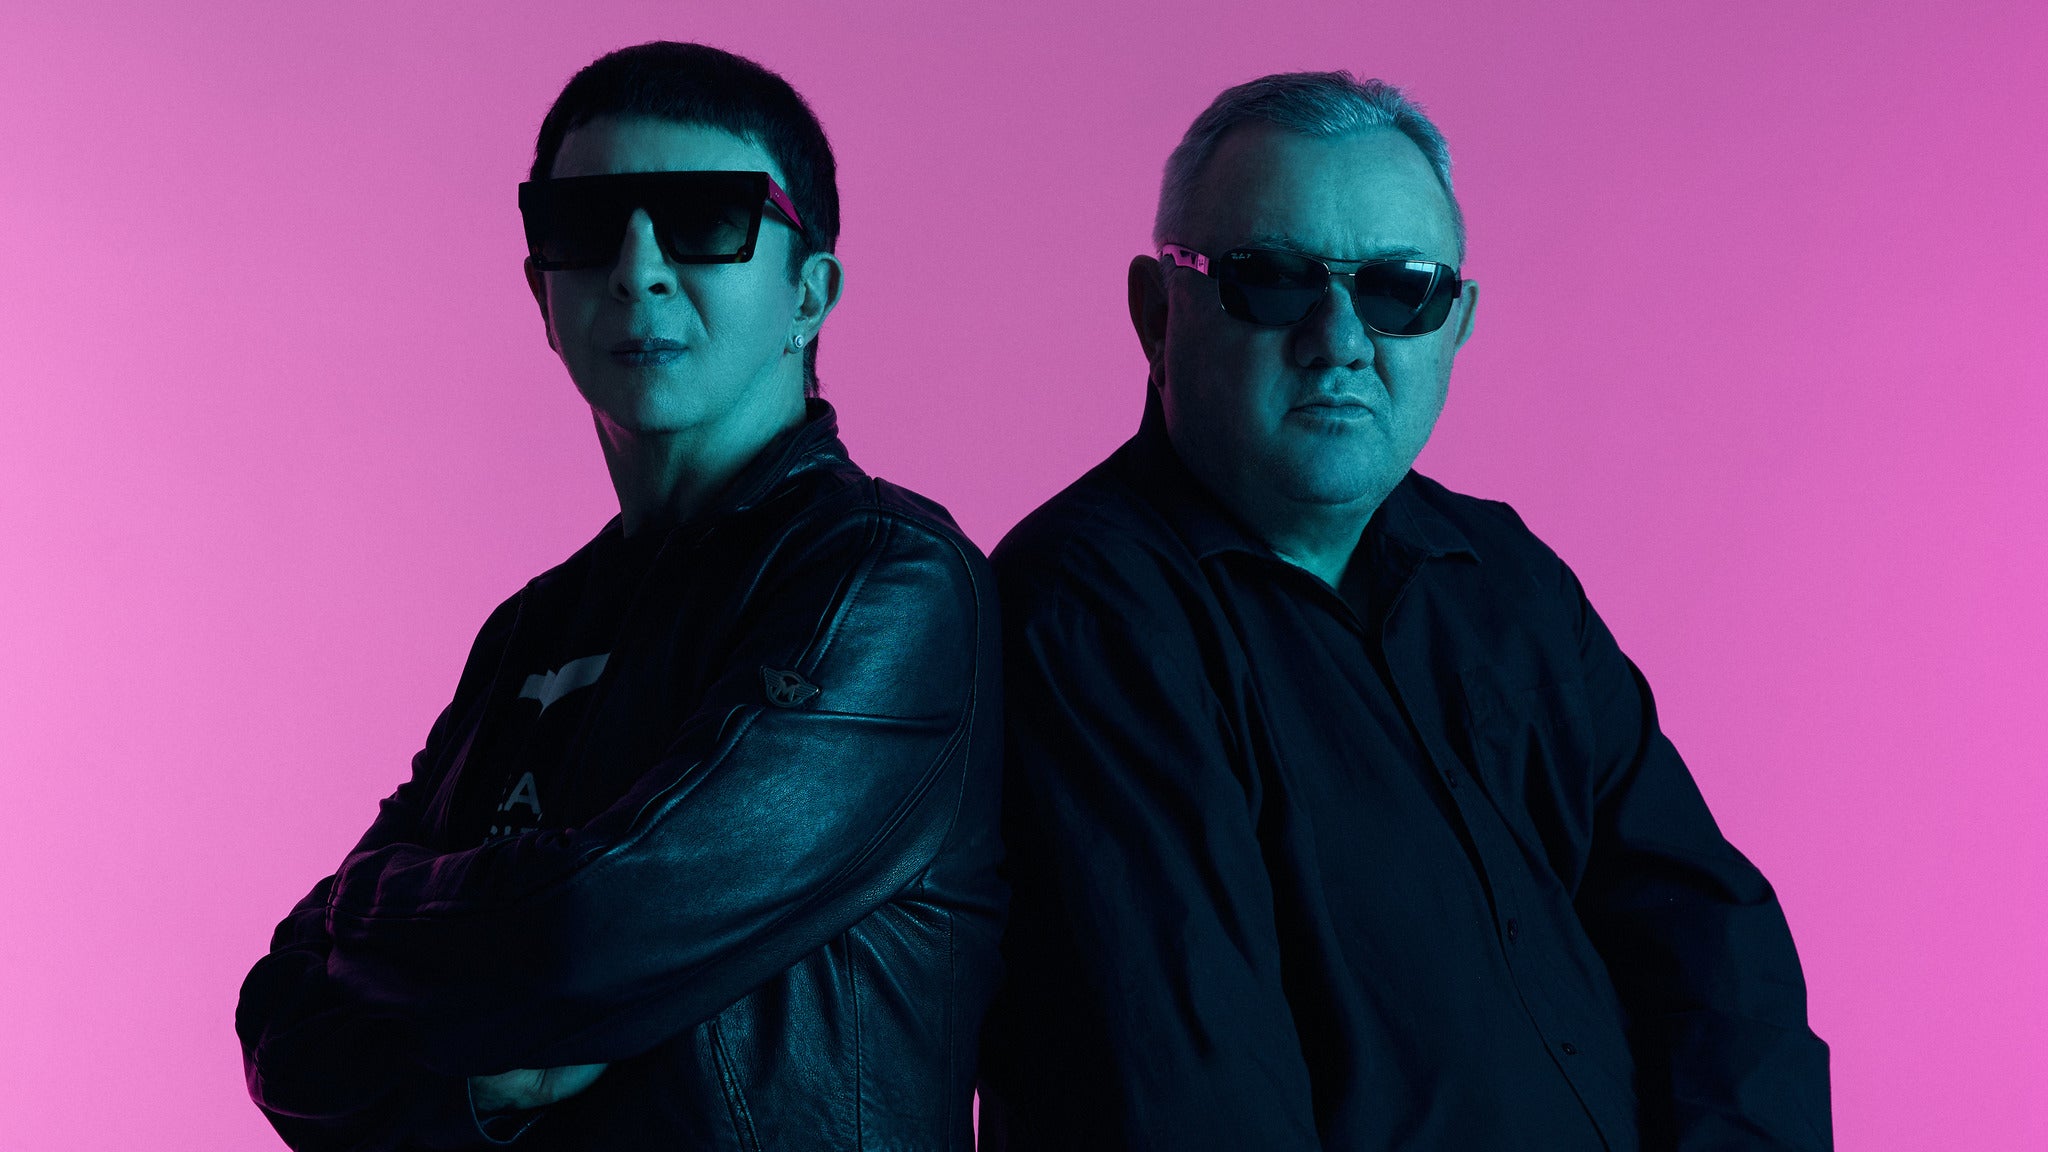 Image used with permission from Ticketmaster | Soft Cell tickets